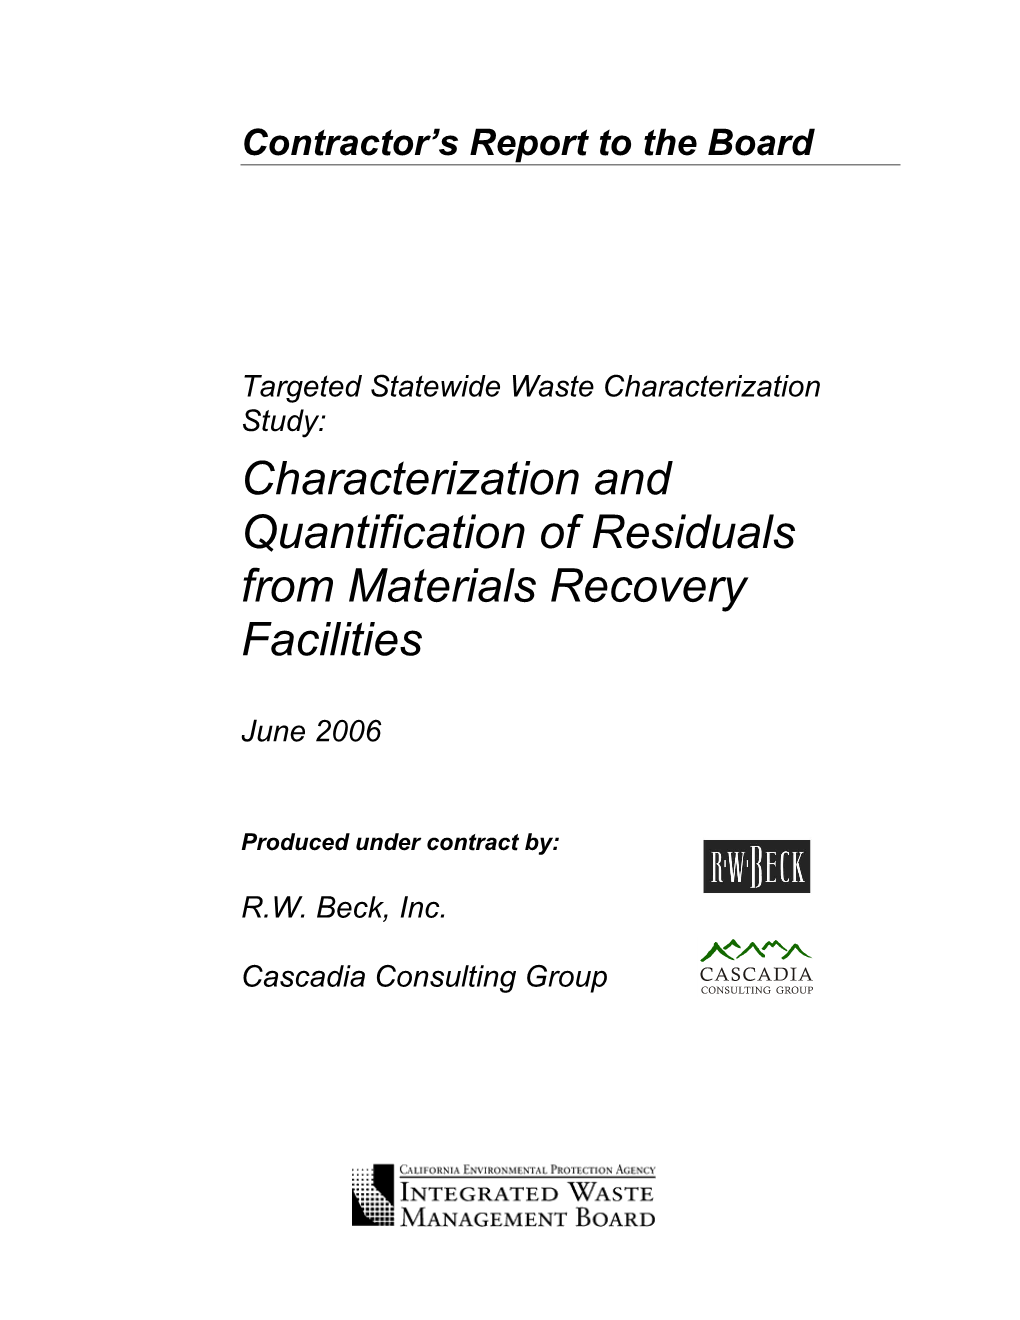 Targeted Statewide Waste Characterization Study: Characterization and Quantification Of